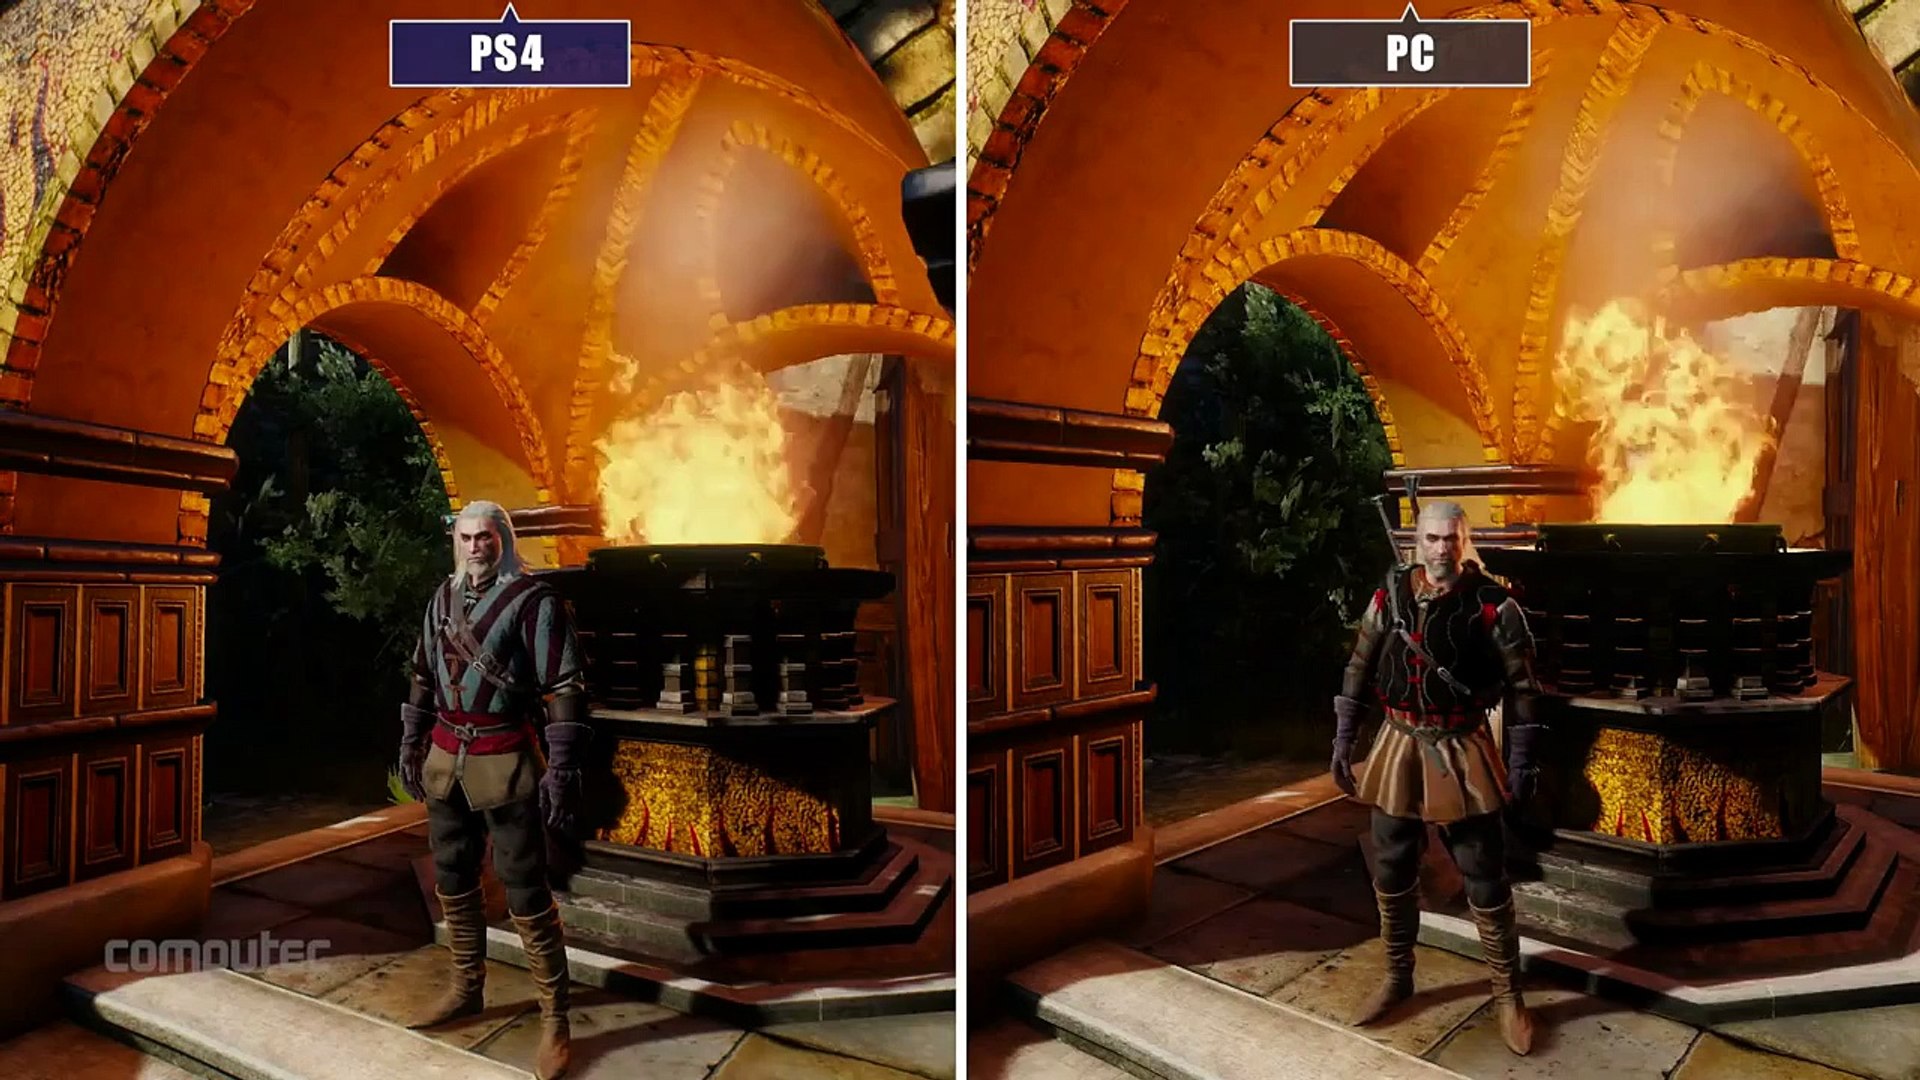 Amerika håndtering Tyggegummi The Witcher 3: Wild Hunt PC vs PS4 (Graphics comparison) - video Dailymotion